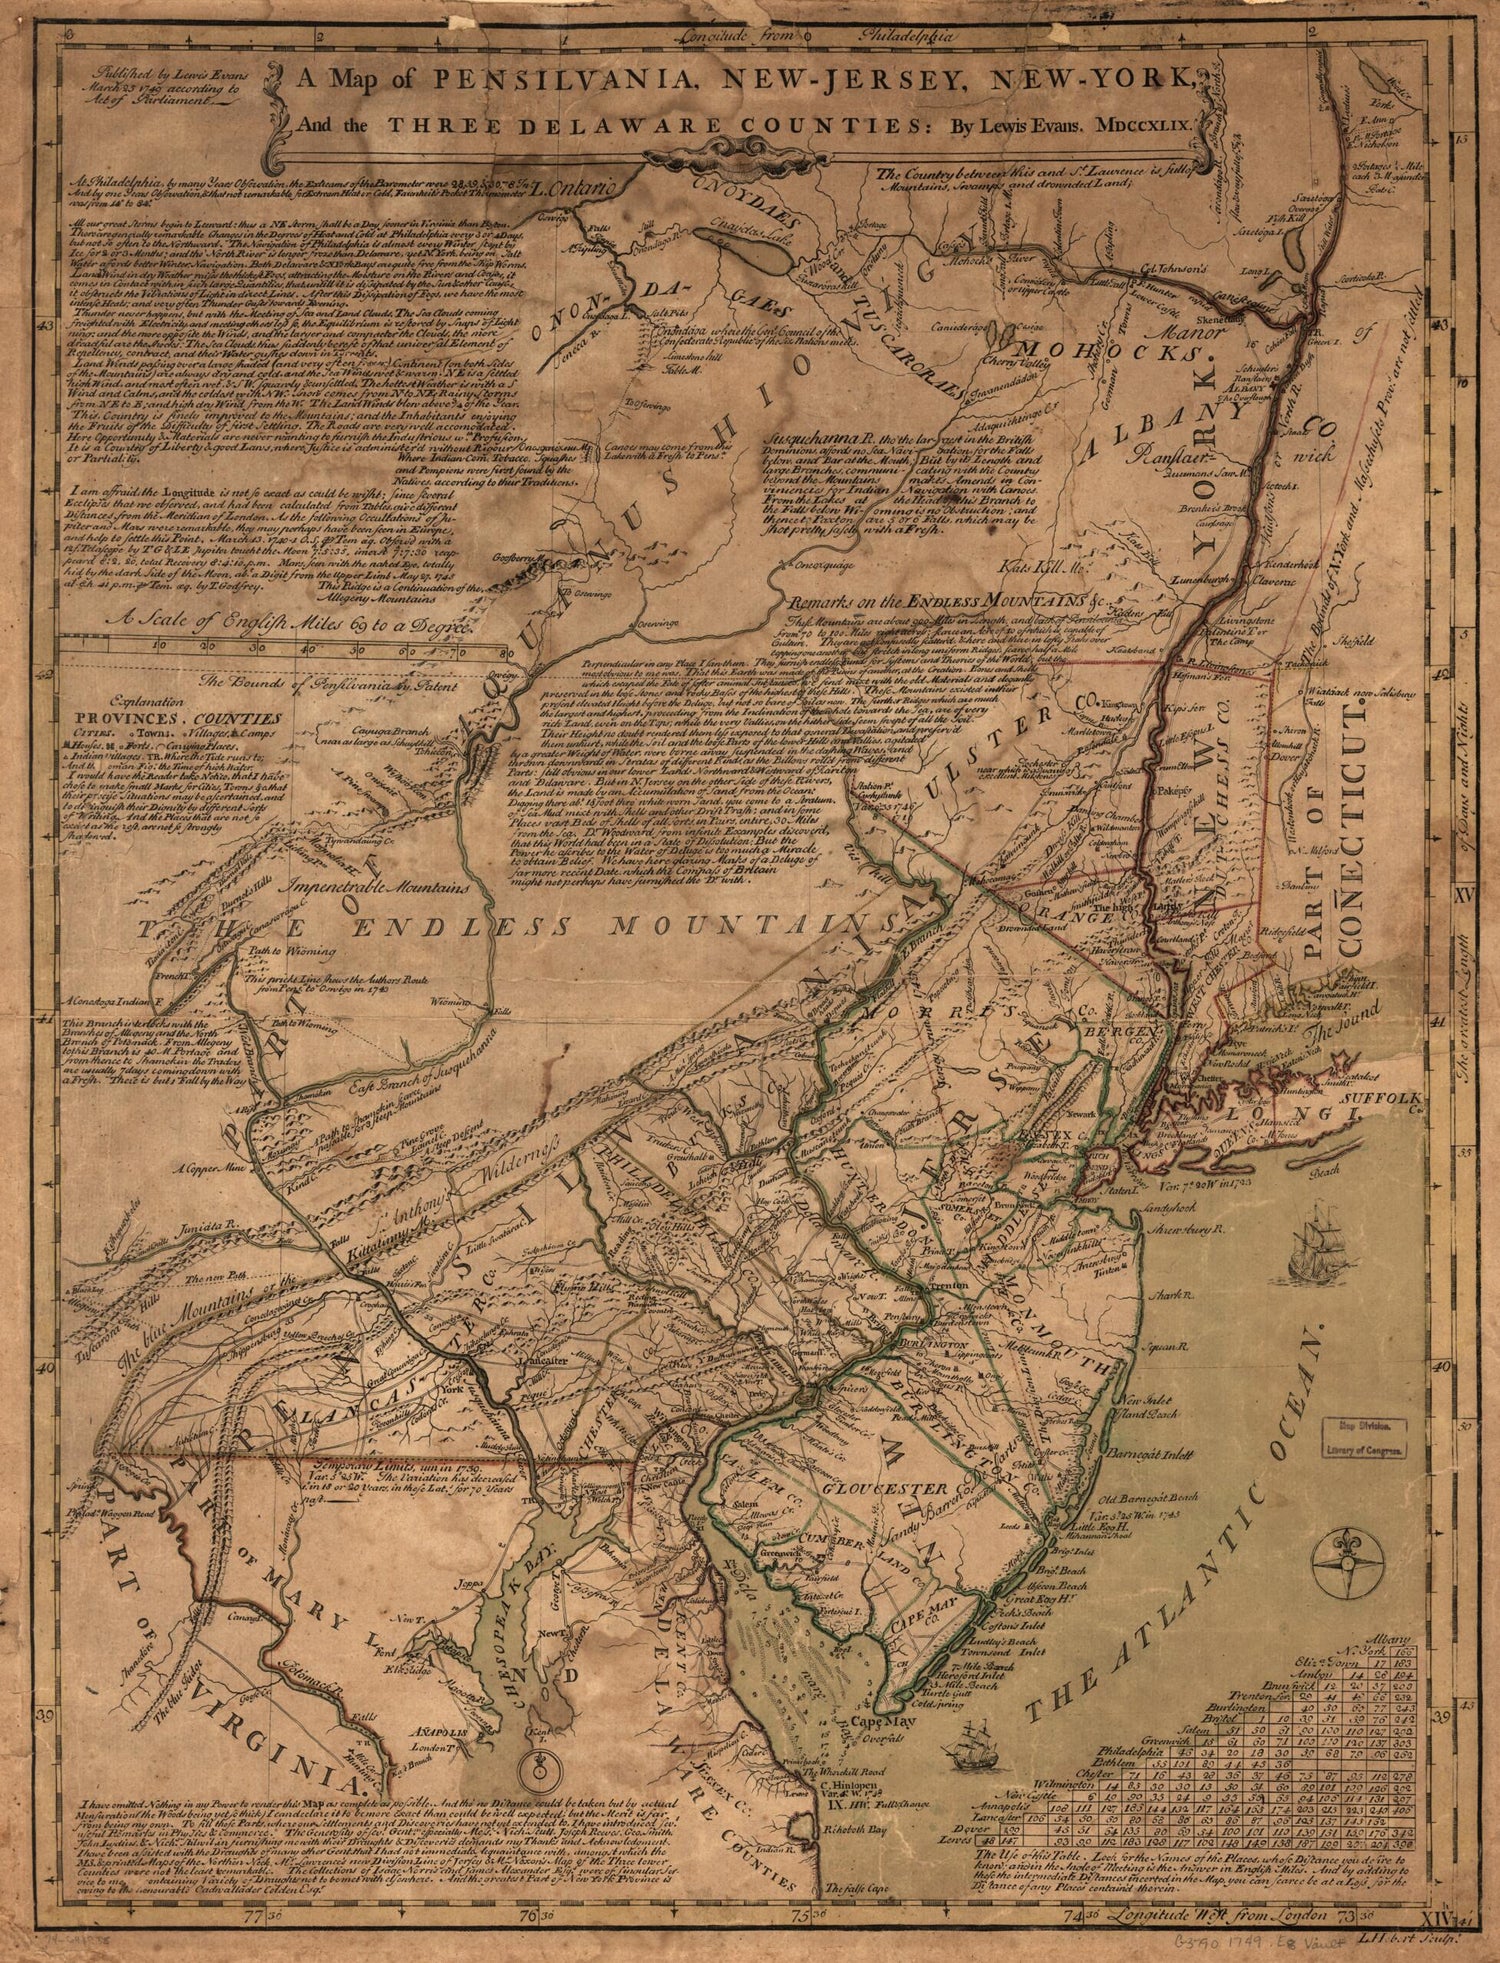 This old map of Jersey, New-York, and the Three Delaware Counties from 1749 was created by Lewis Evans, L. Hebert in 1749